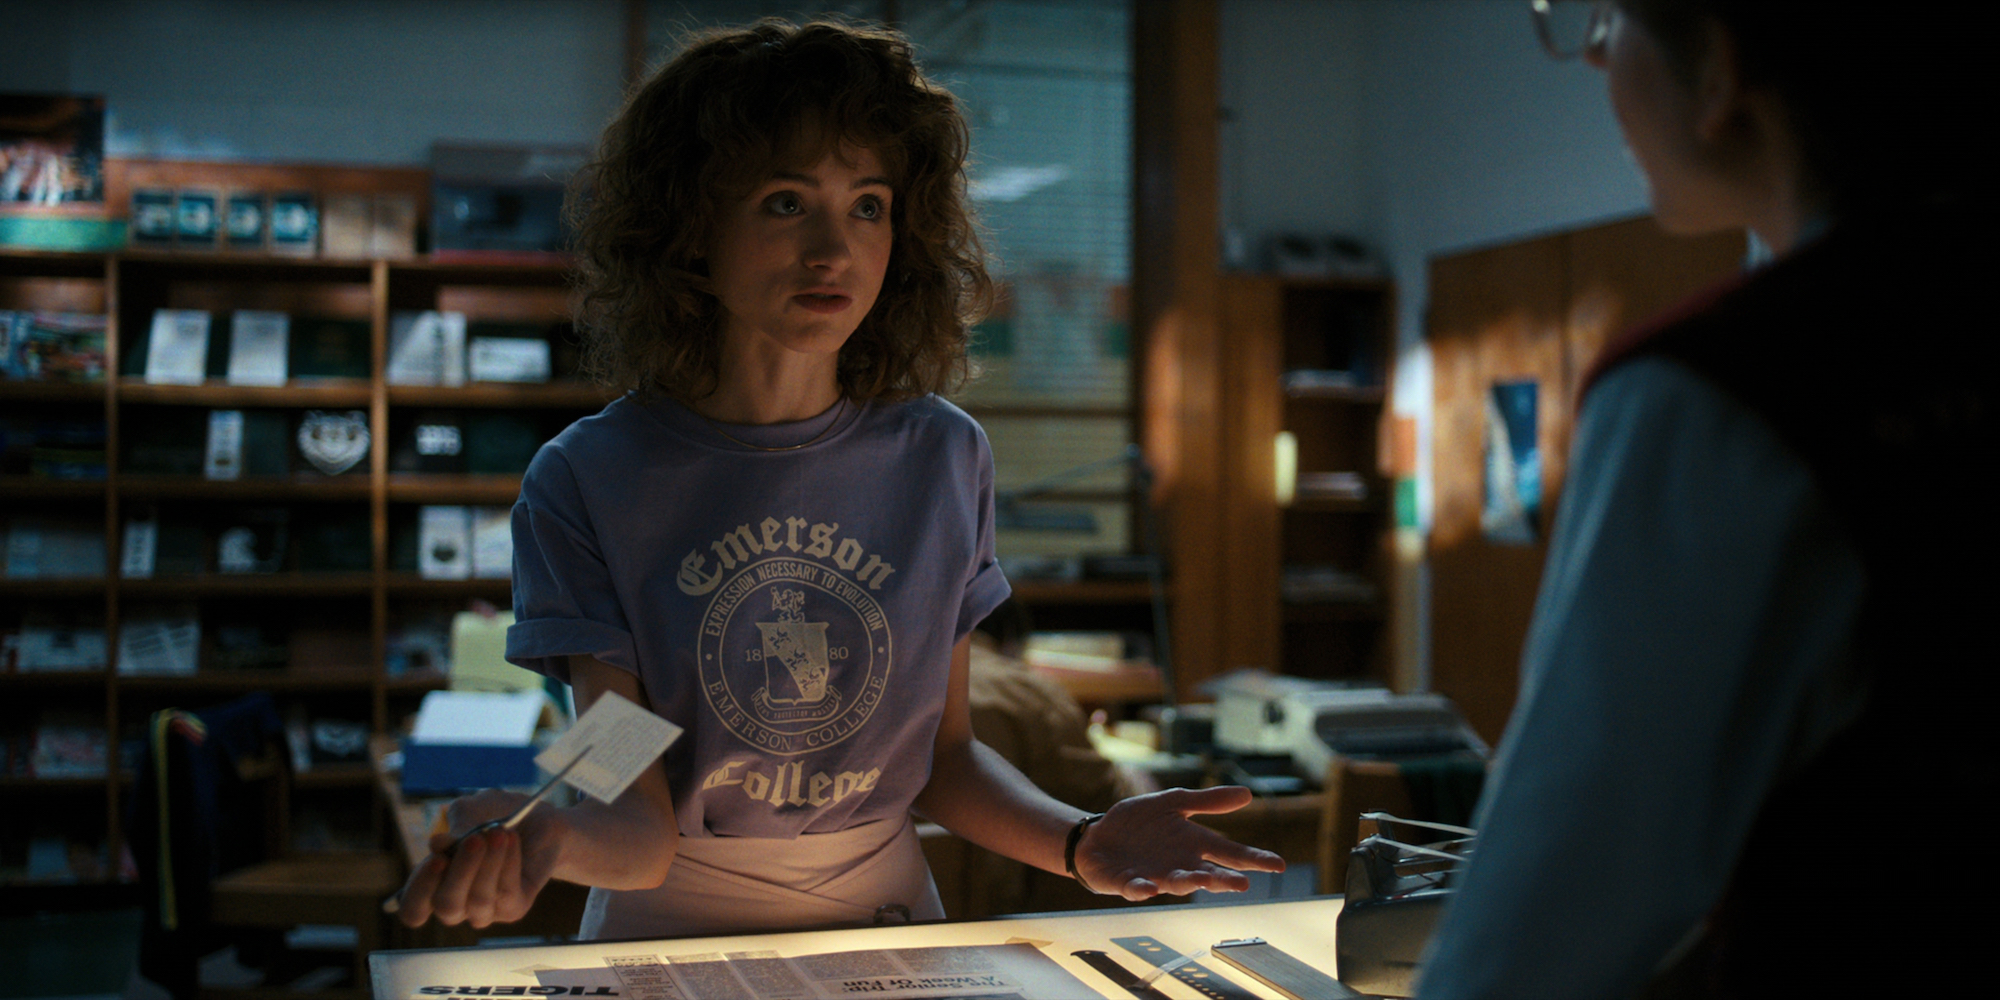 'Stranger Things 4' questions we have include why does Vecna want Nancy? Natalia Dyer, seen here as Nancy, in 'Stranger Things 4' Volume I.